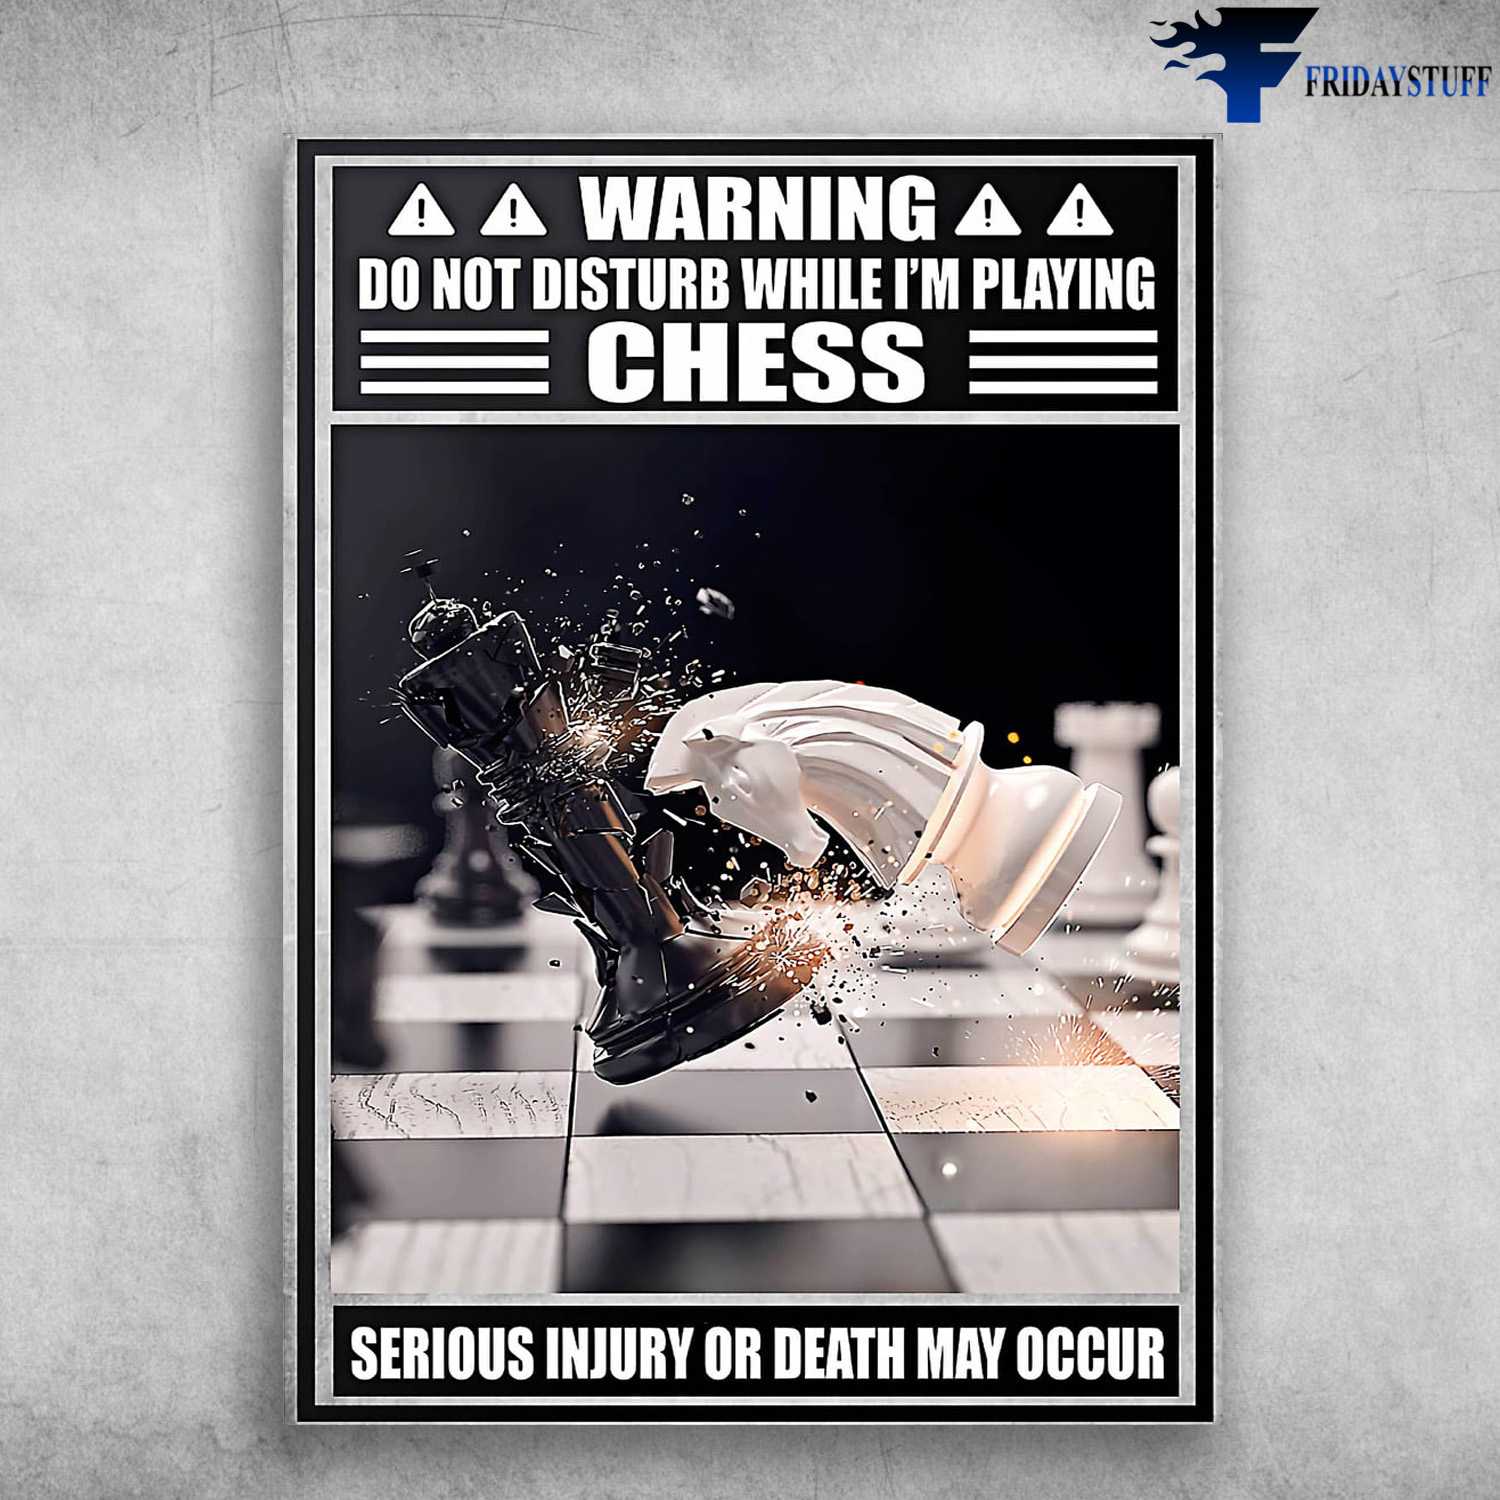 Chess Poster, Chess Lover, Warning, Do Not Disturb While I'm Playing Chess, Serious Injury Or Death May Occur